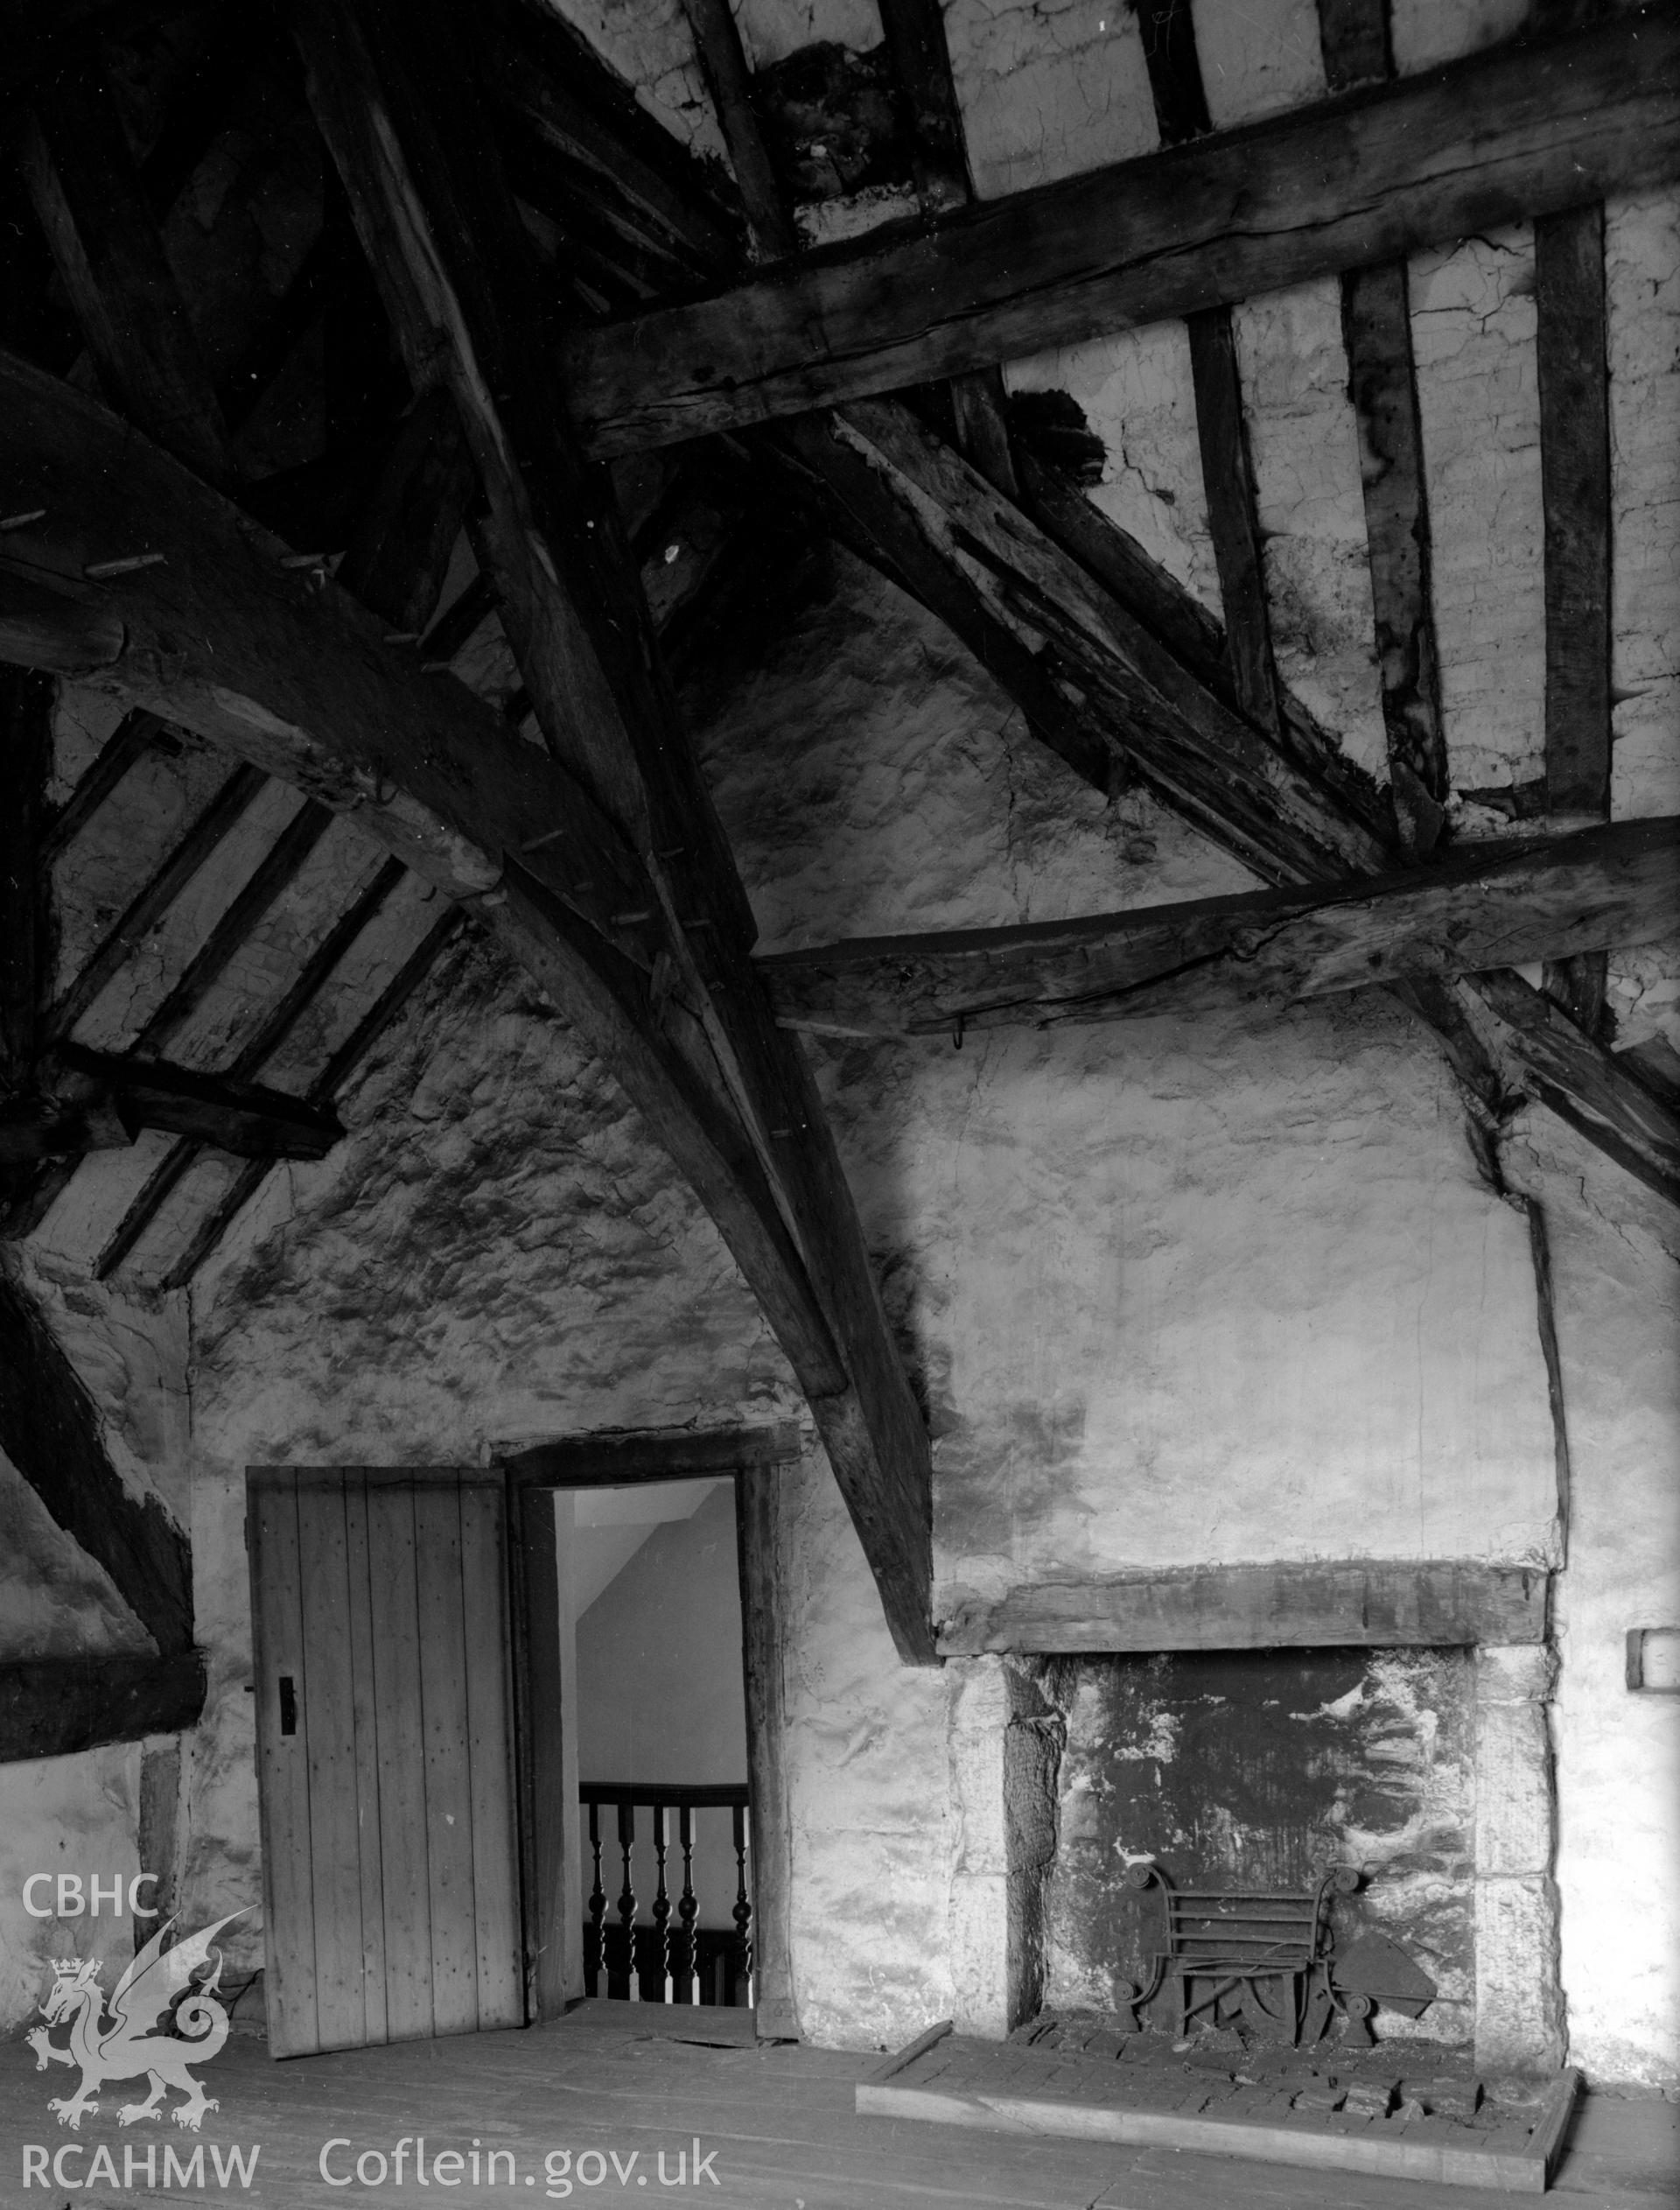 Timber beamed roof showing the common rafters, purlin and a cruck